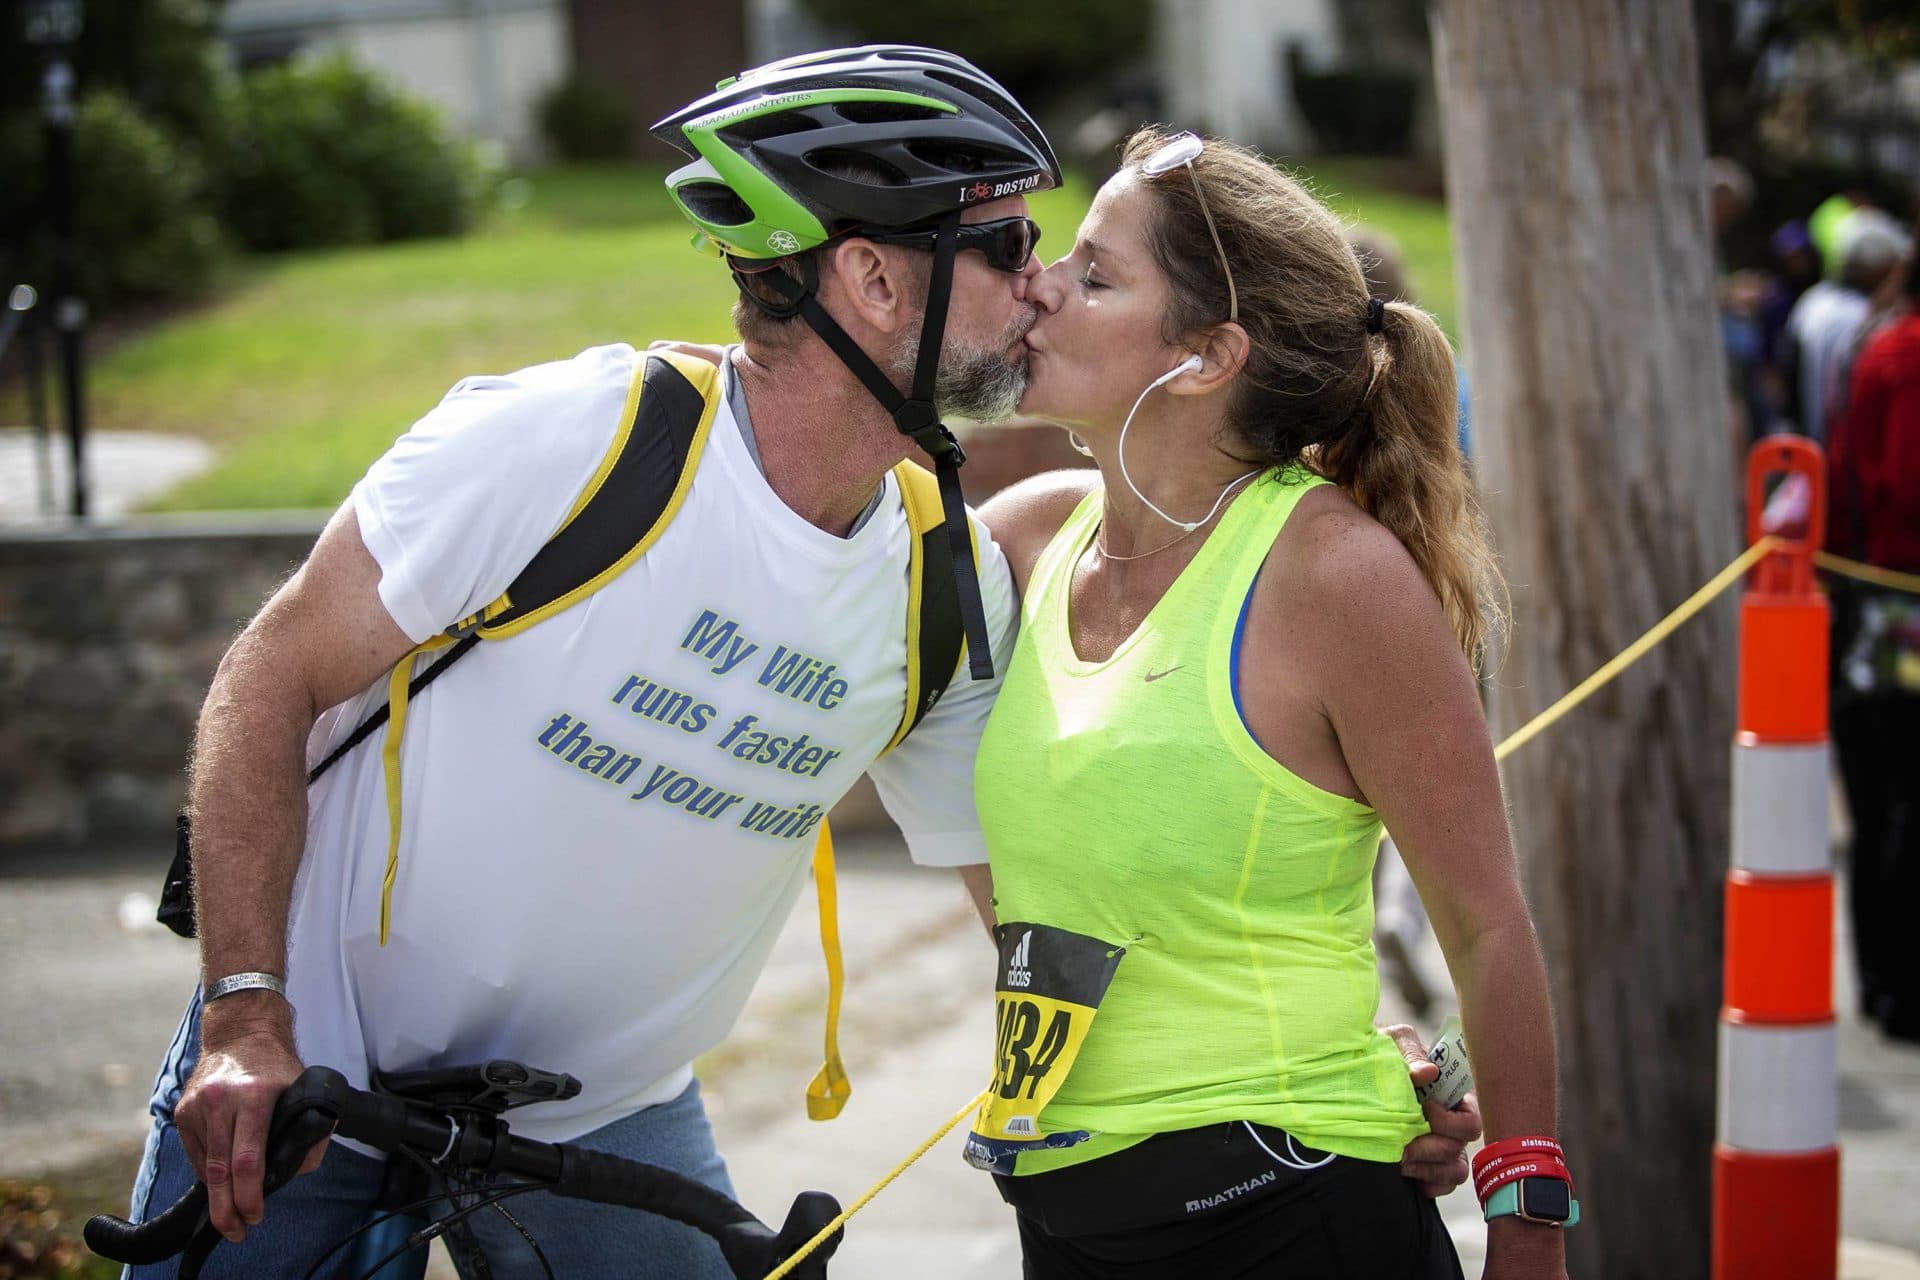 Melissa Rothe stops at mile 17 to kiss her husband Richard, who showed his support by following her along the marathon route on his bicycle. (Robin Lubbock/WBUR)